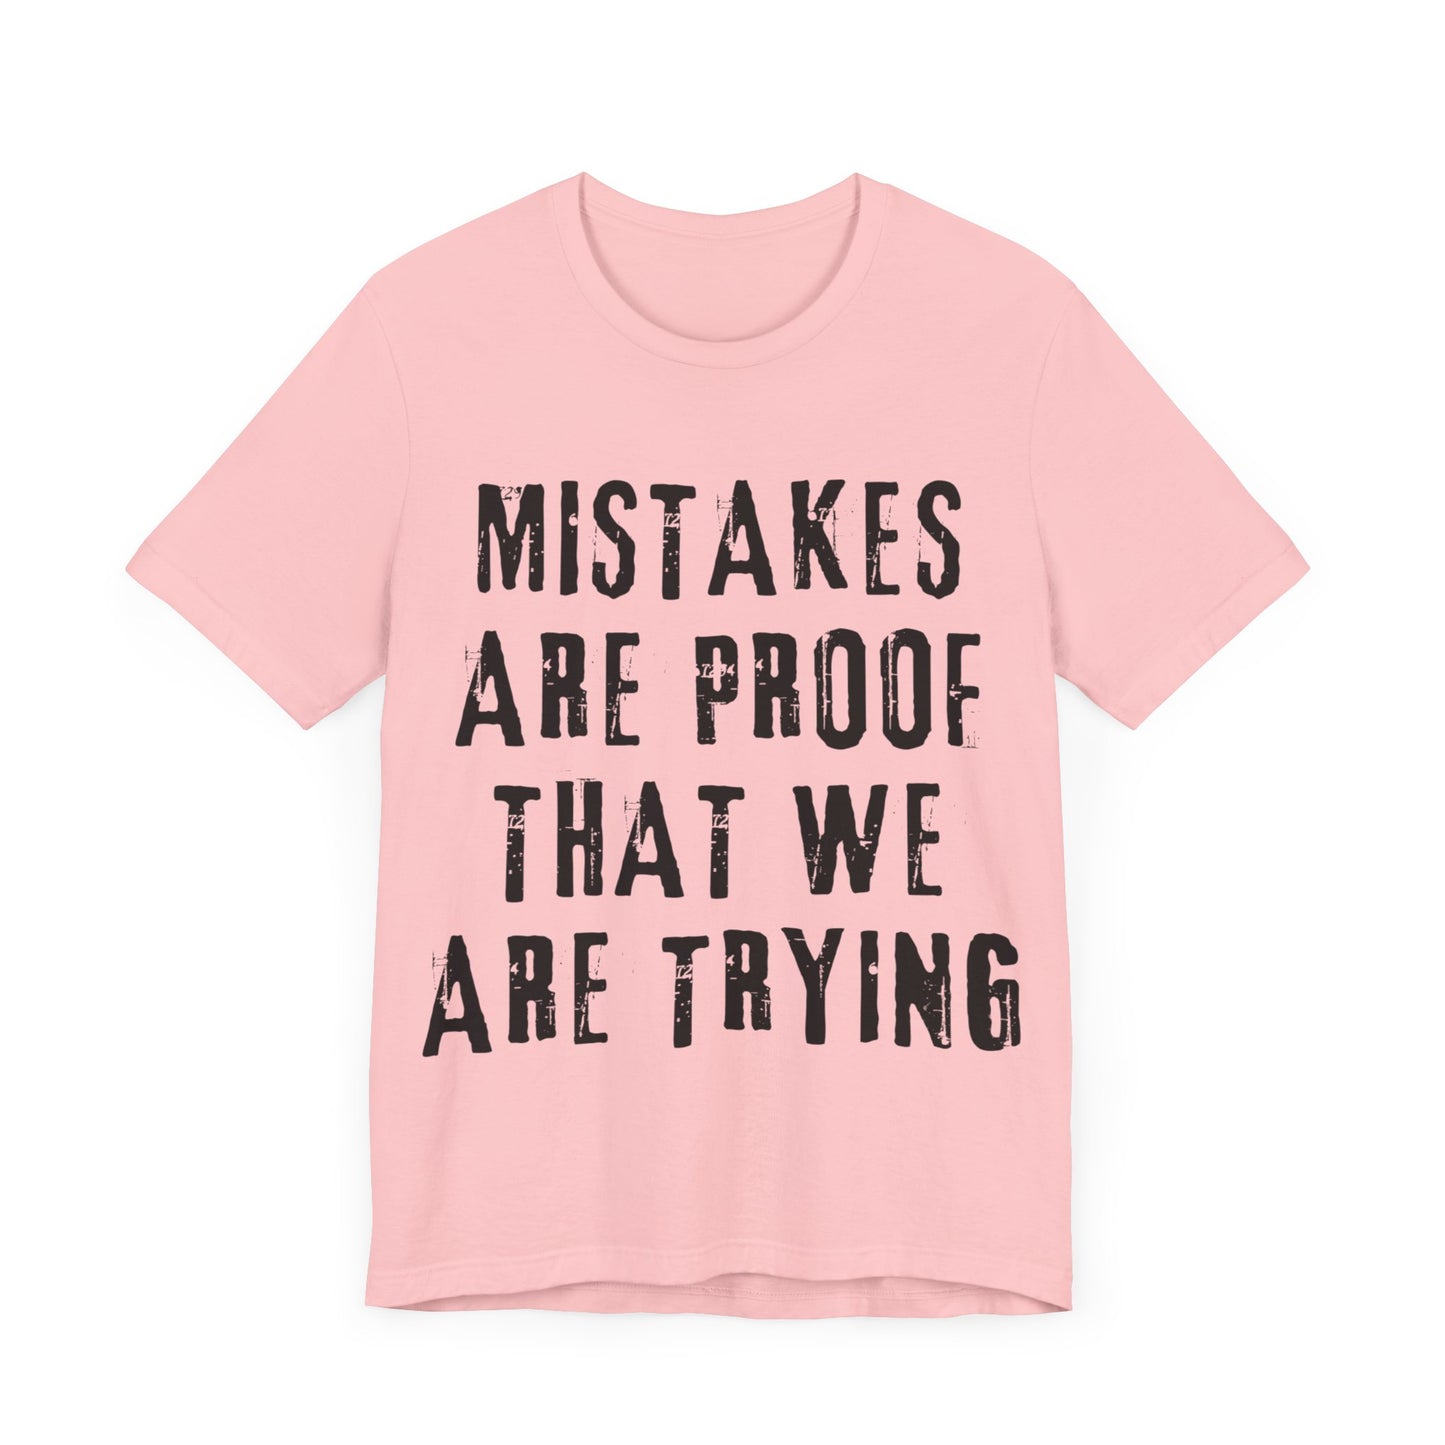 Mistakes are proof T-shirt - Light Colors